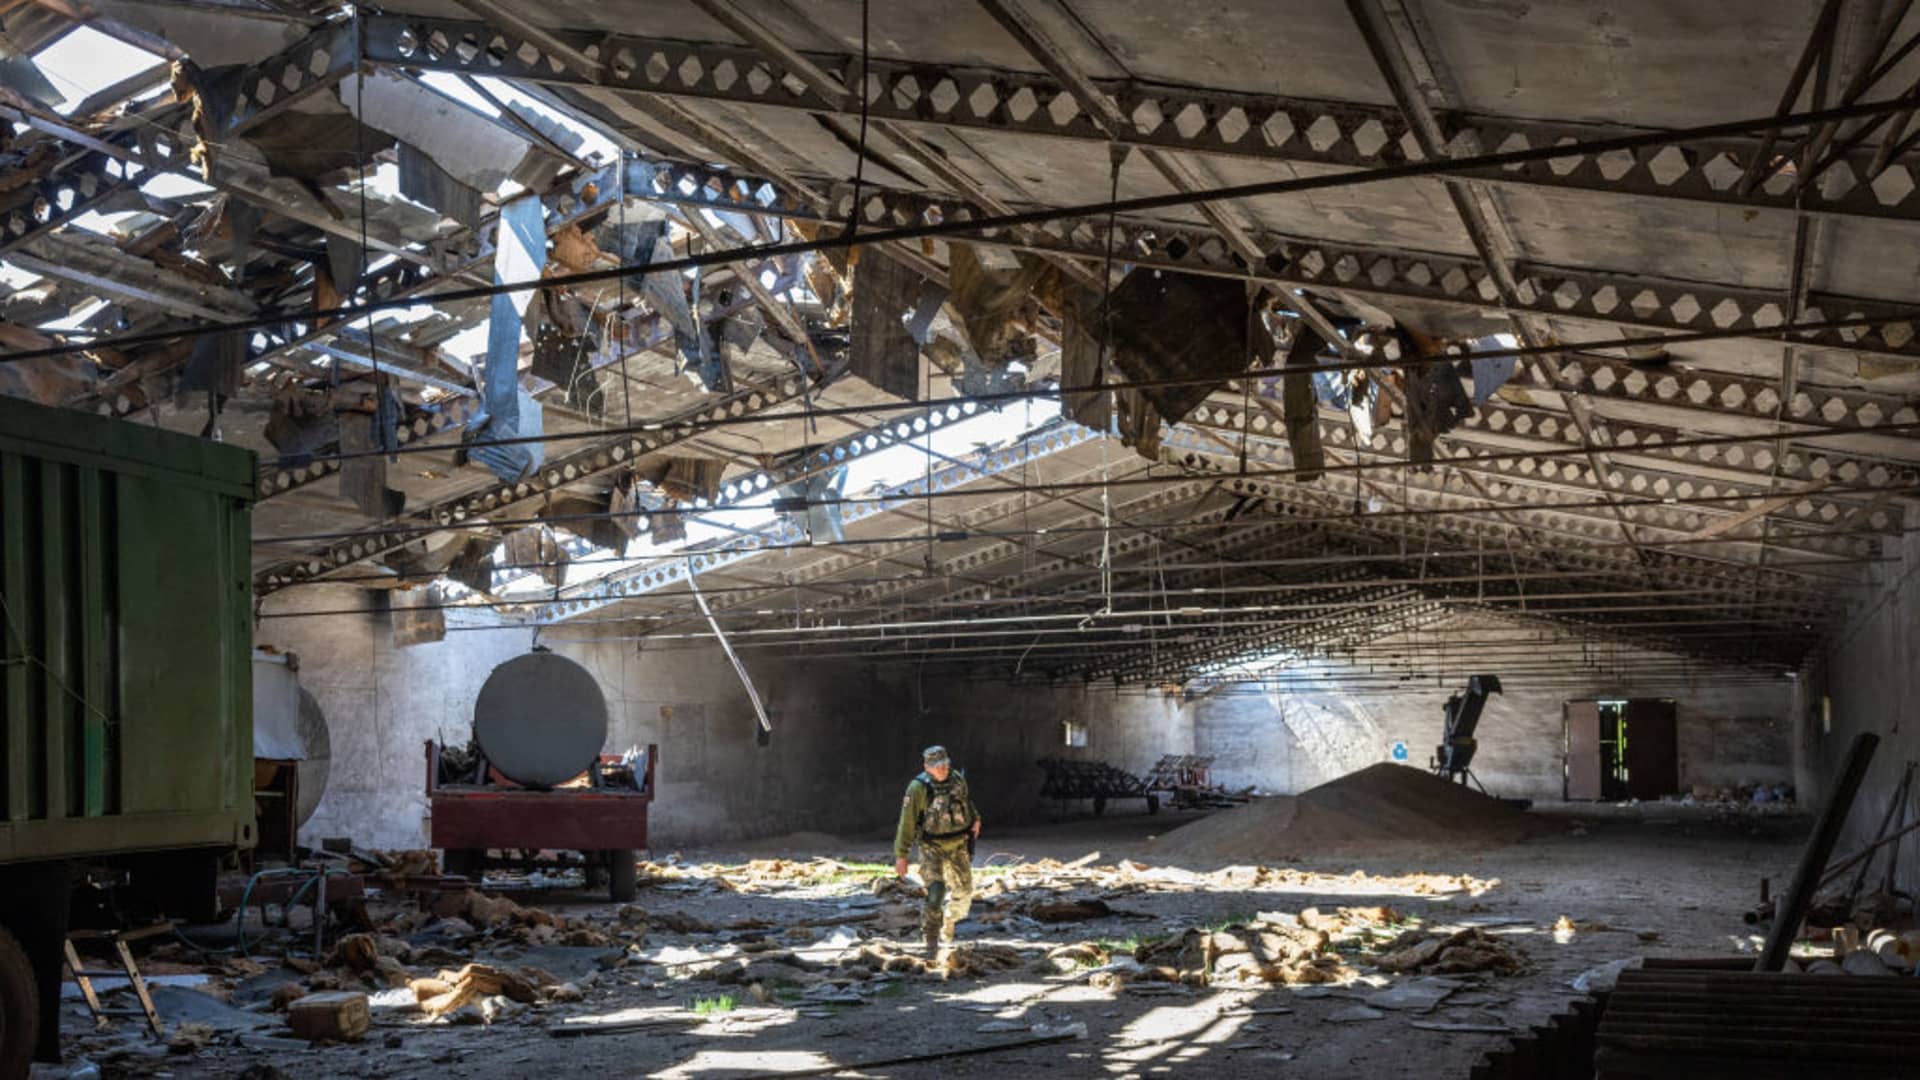 A Ukrainian army officer inspects a grain warehouse shelled by Russian forces on May 6, 2022, near the front lines of Kherson Oblast in Novovorontsovka, Ukraine. Russia has been accused of targeting food storage sites in front-line areas and disrupting Ukraine's wheat production, potentially causing a global shortage.